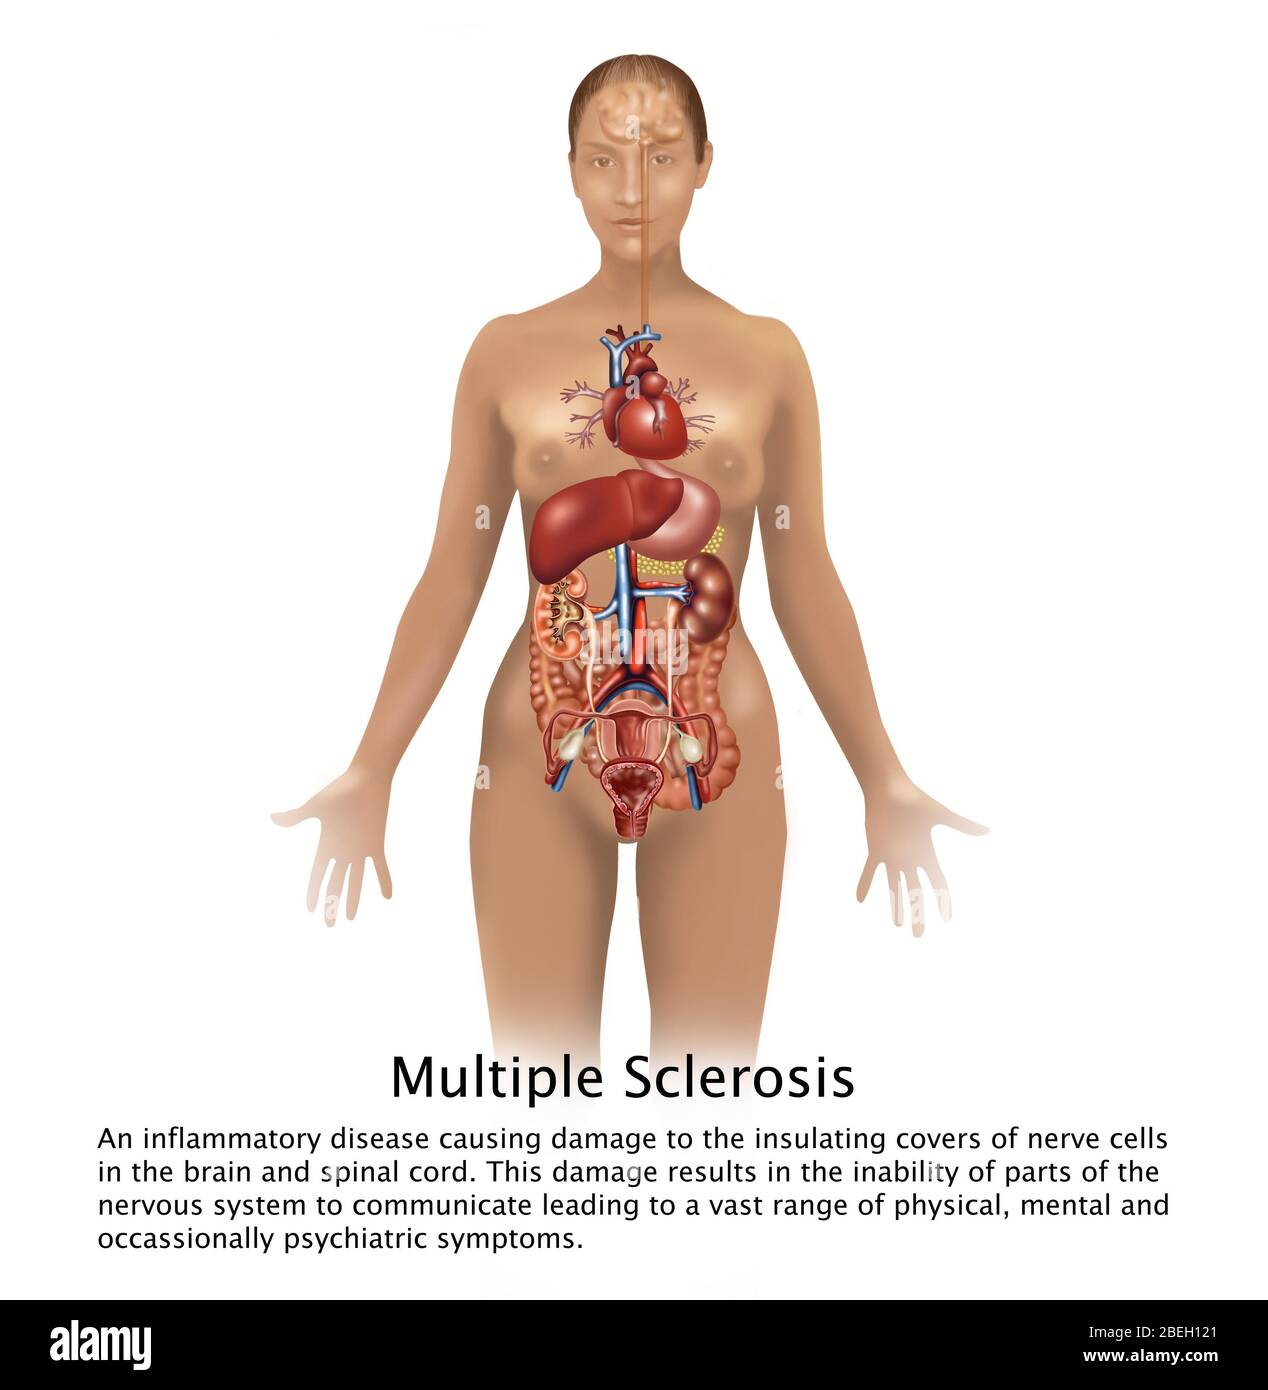 Multiple Sclerosis and Human Body Stock Photo